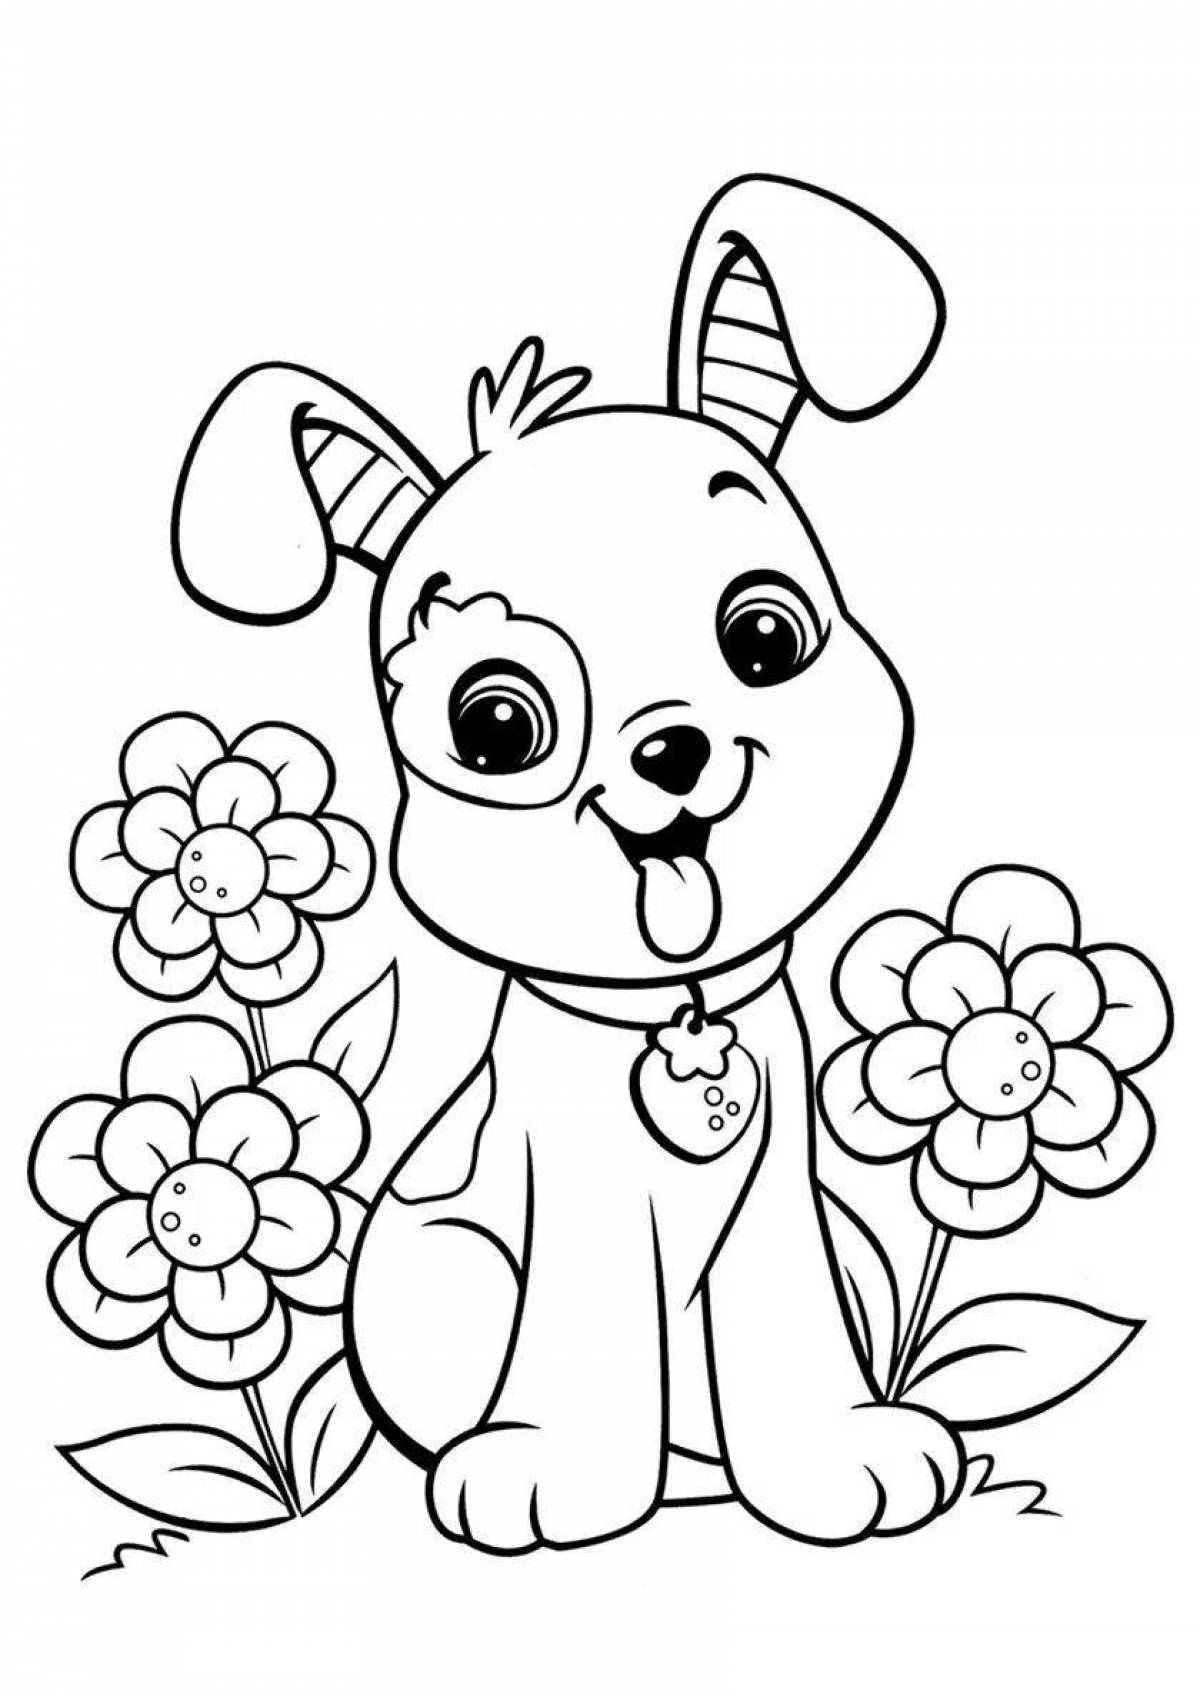 Funny dog ​​coloring book